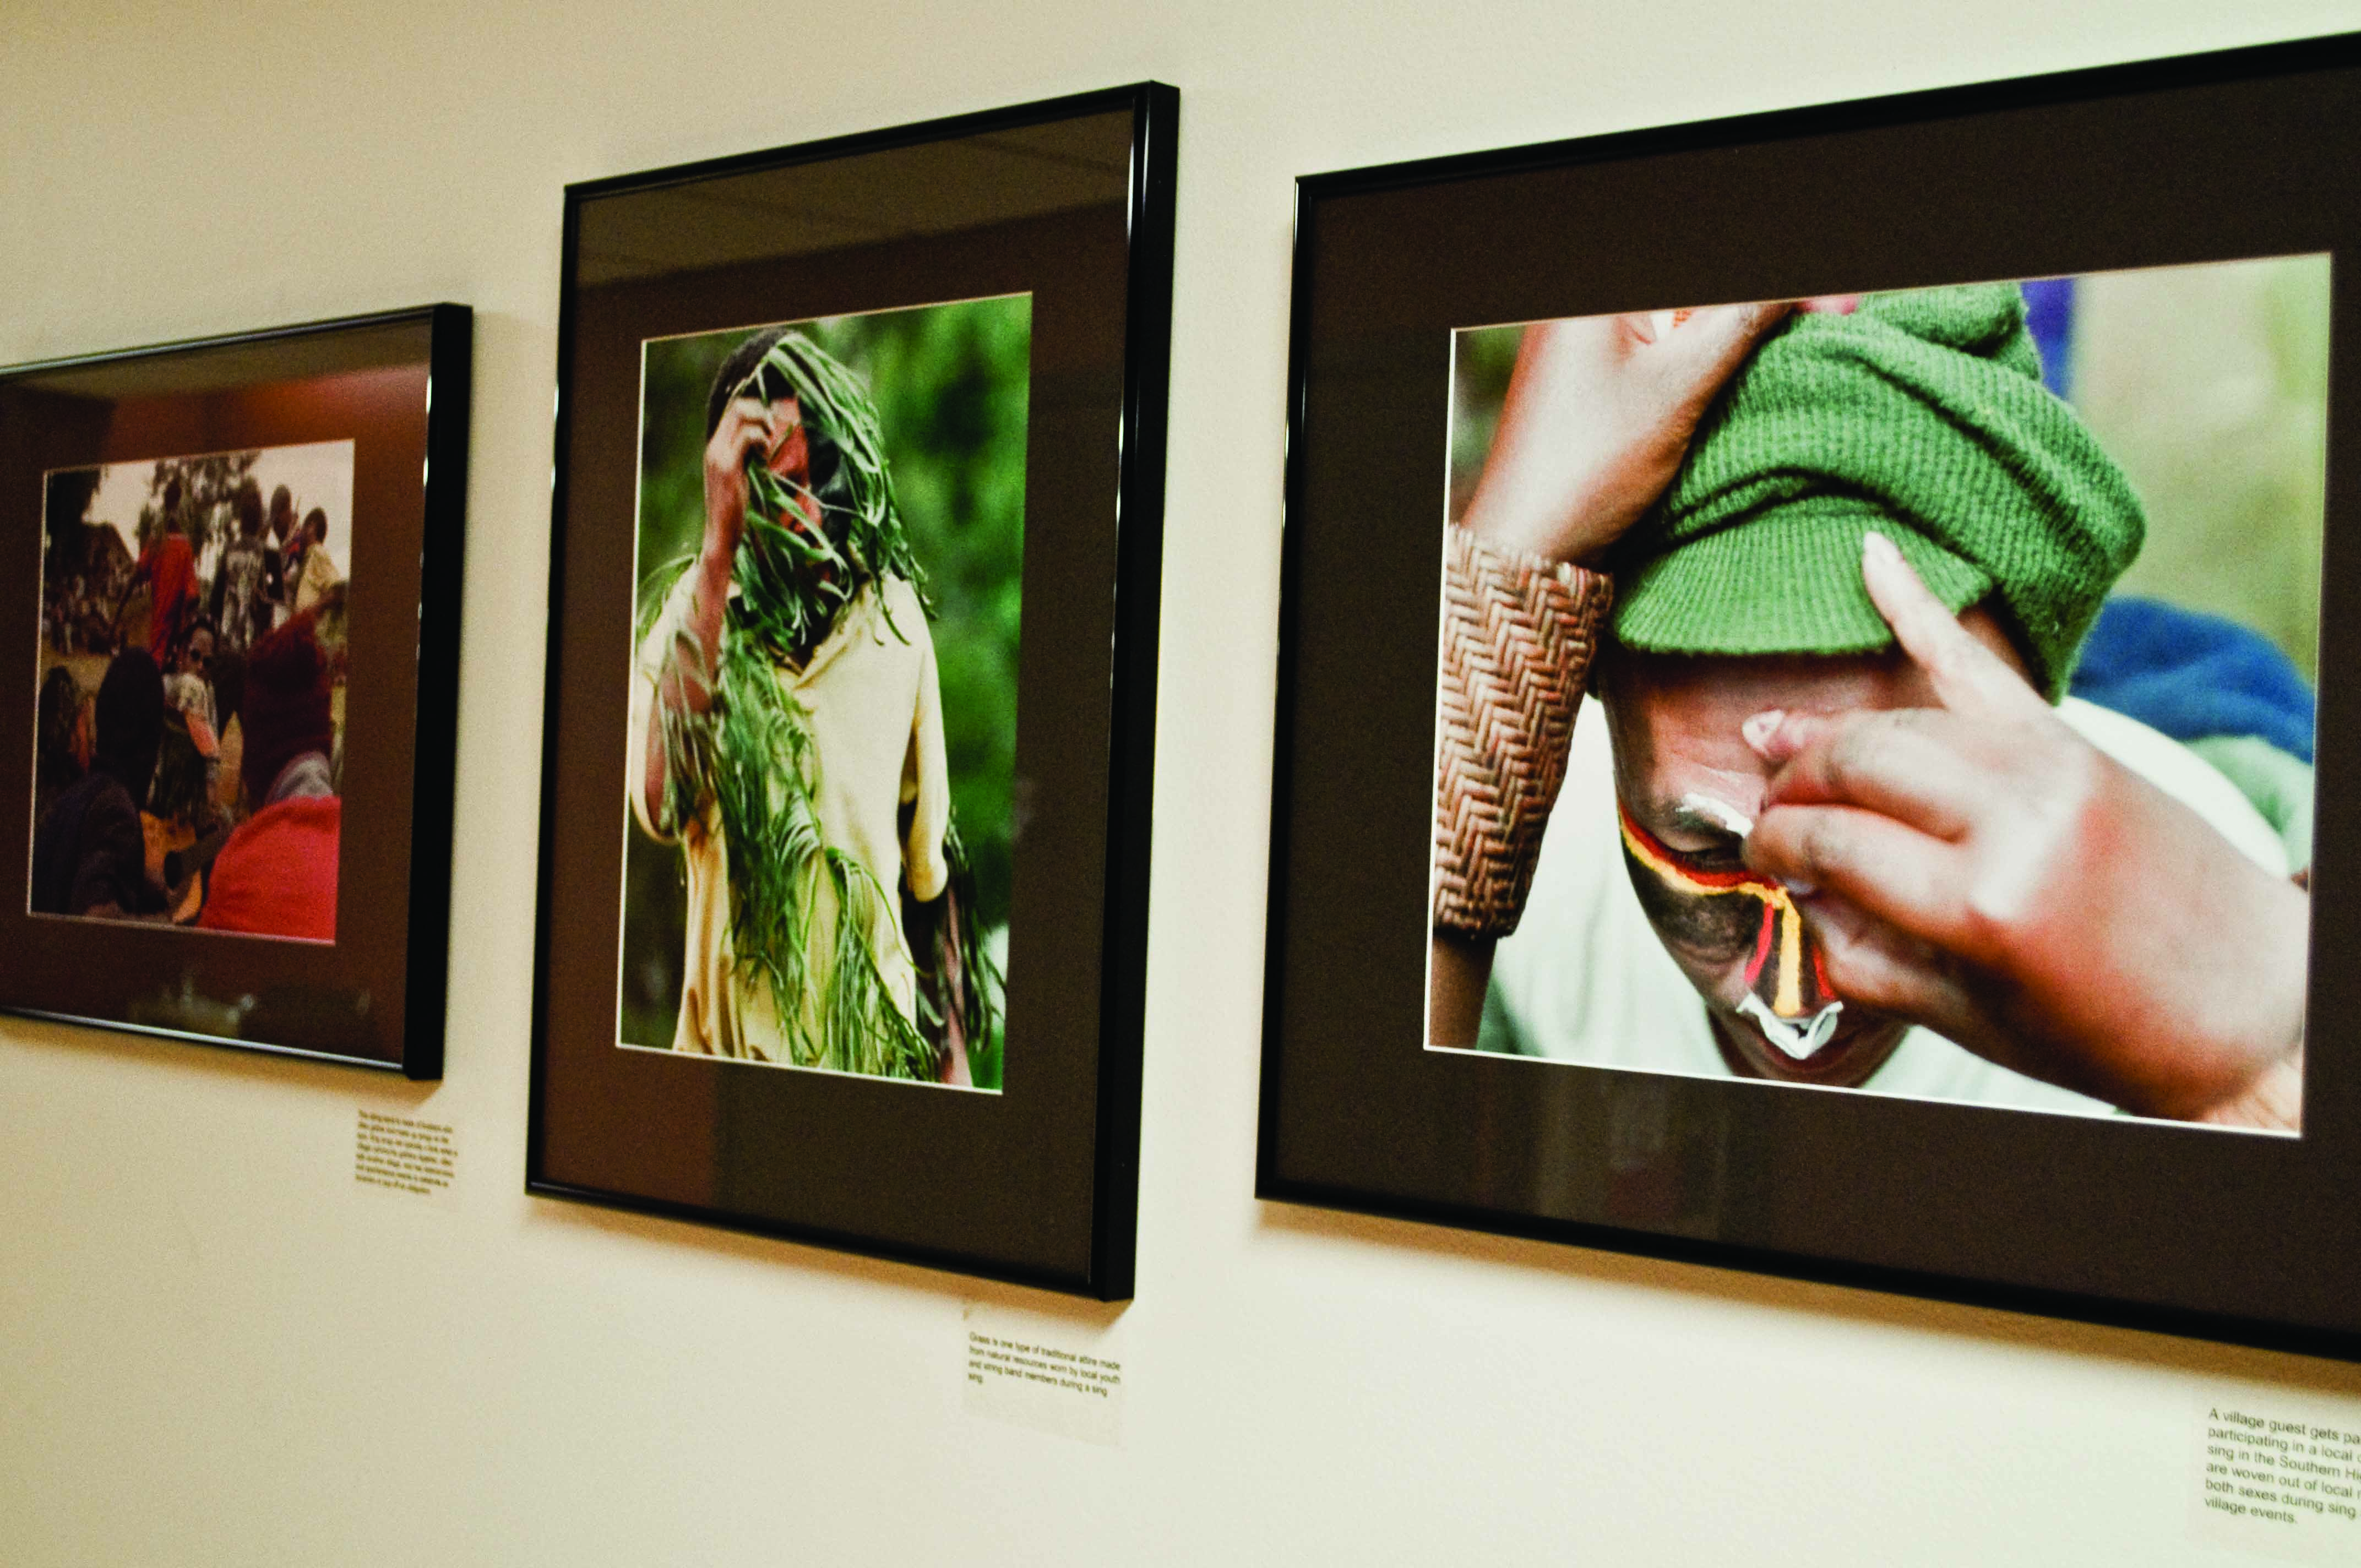 Photographs in NKU's Anthropology Museum